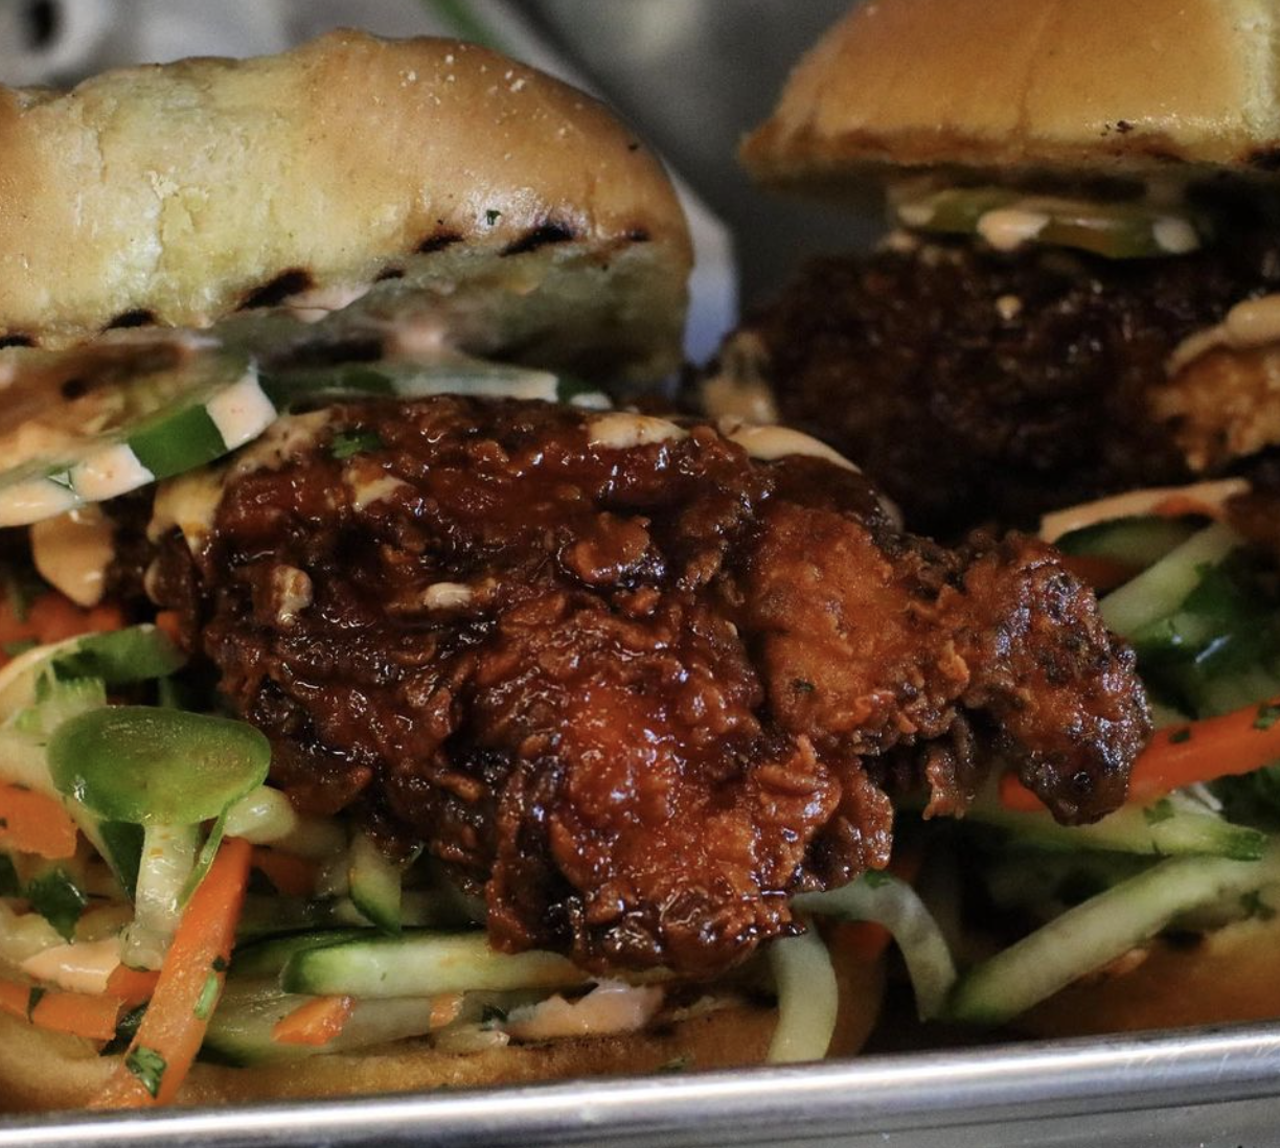 Goldfeather 
834 NW Loop 410 Suite 106, (210) 342-2473,  goldfeatherbb.com 
In an unconventional twist, Goldfeather’s Bun Mi Fried Chicken brings the unique flavors of a bahn mi to the fried chicken sandwich. Two titans of flavor — one convenient sandwich!  
Photo via Instagram / goldfeatherbb